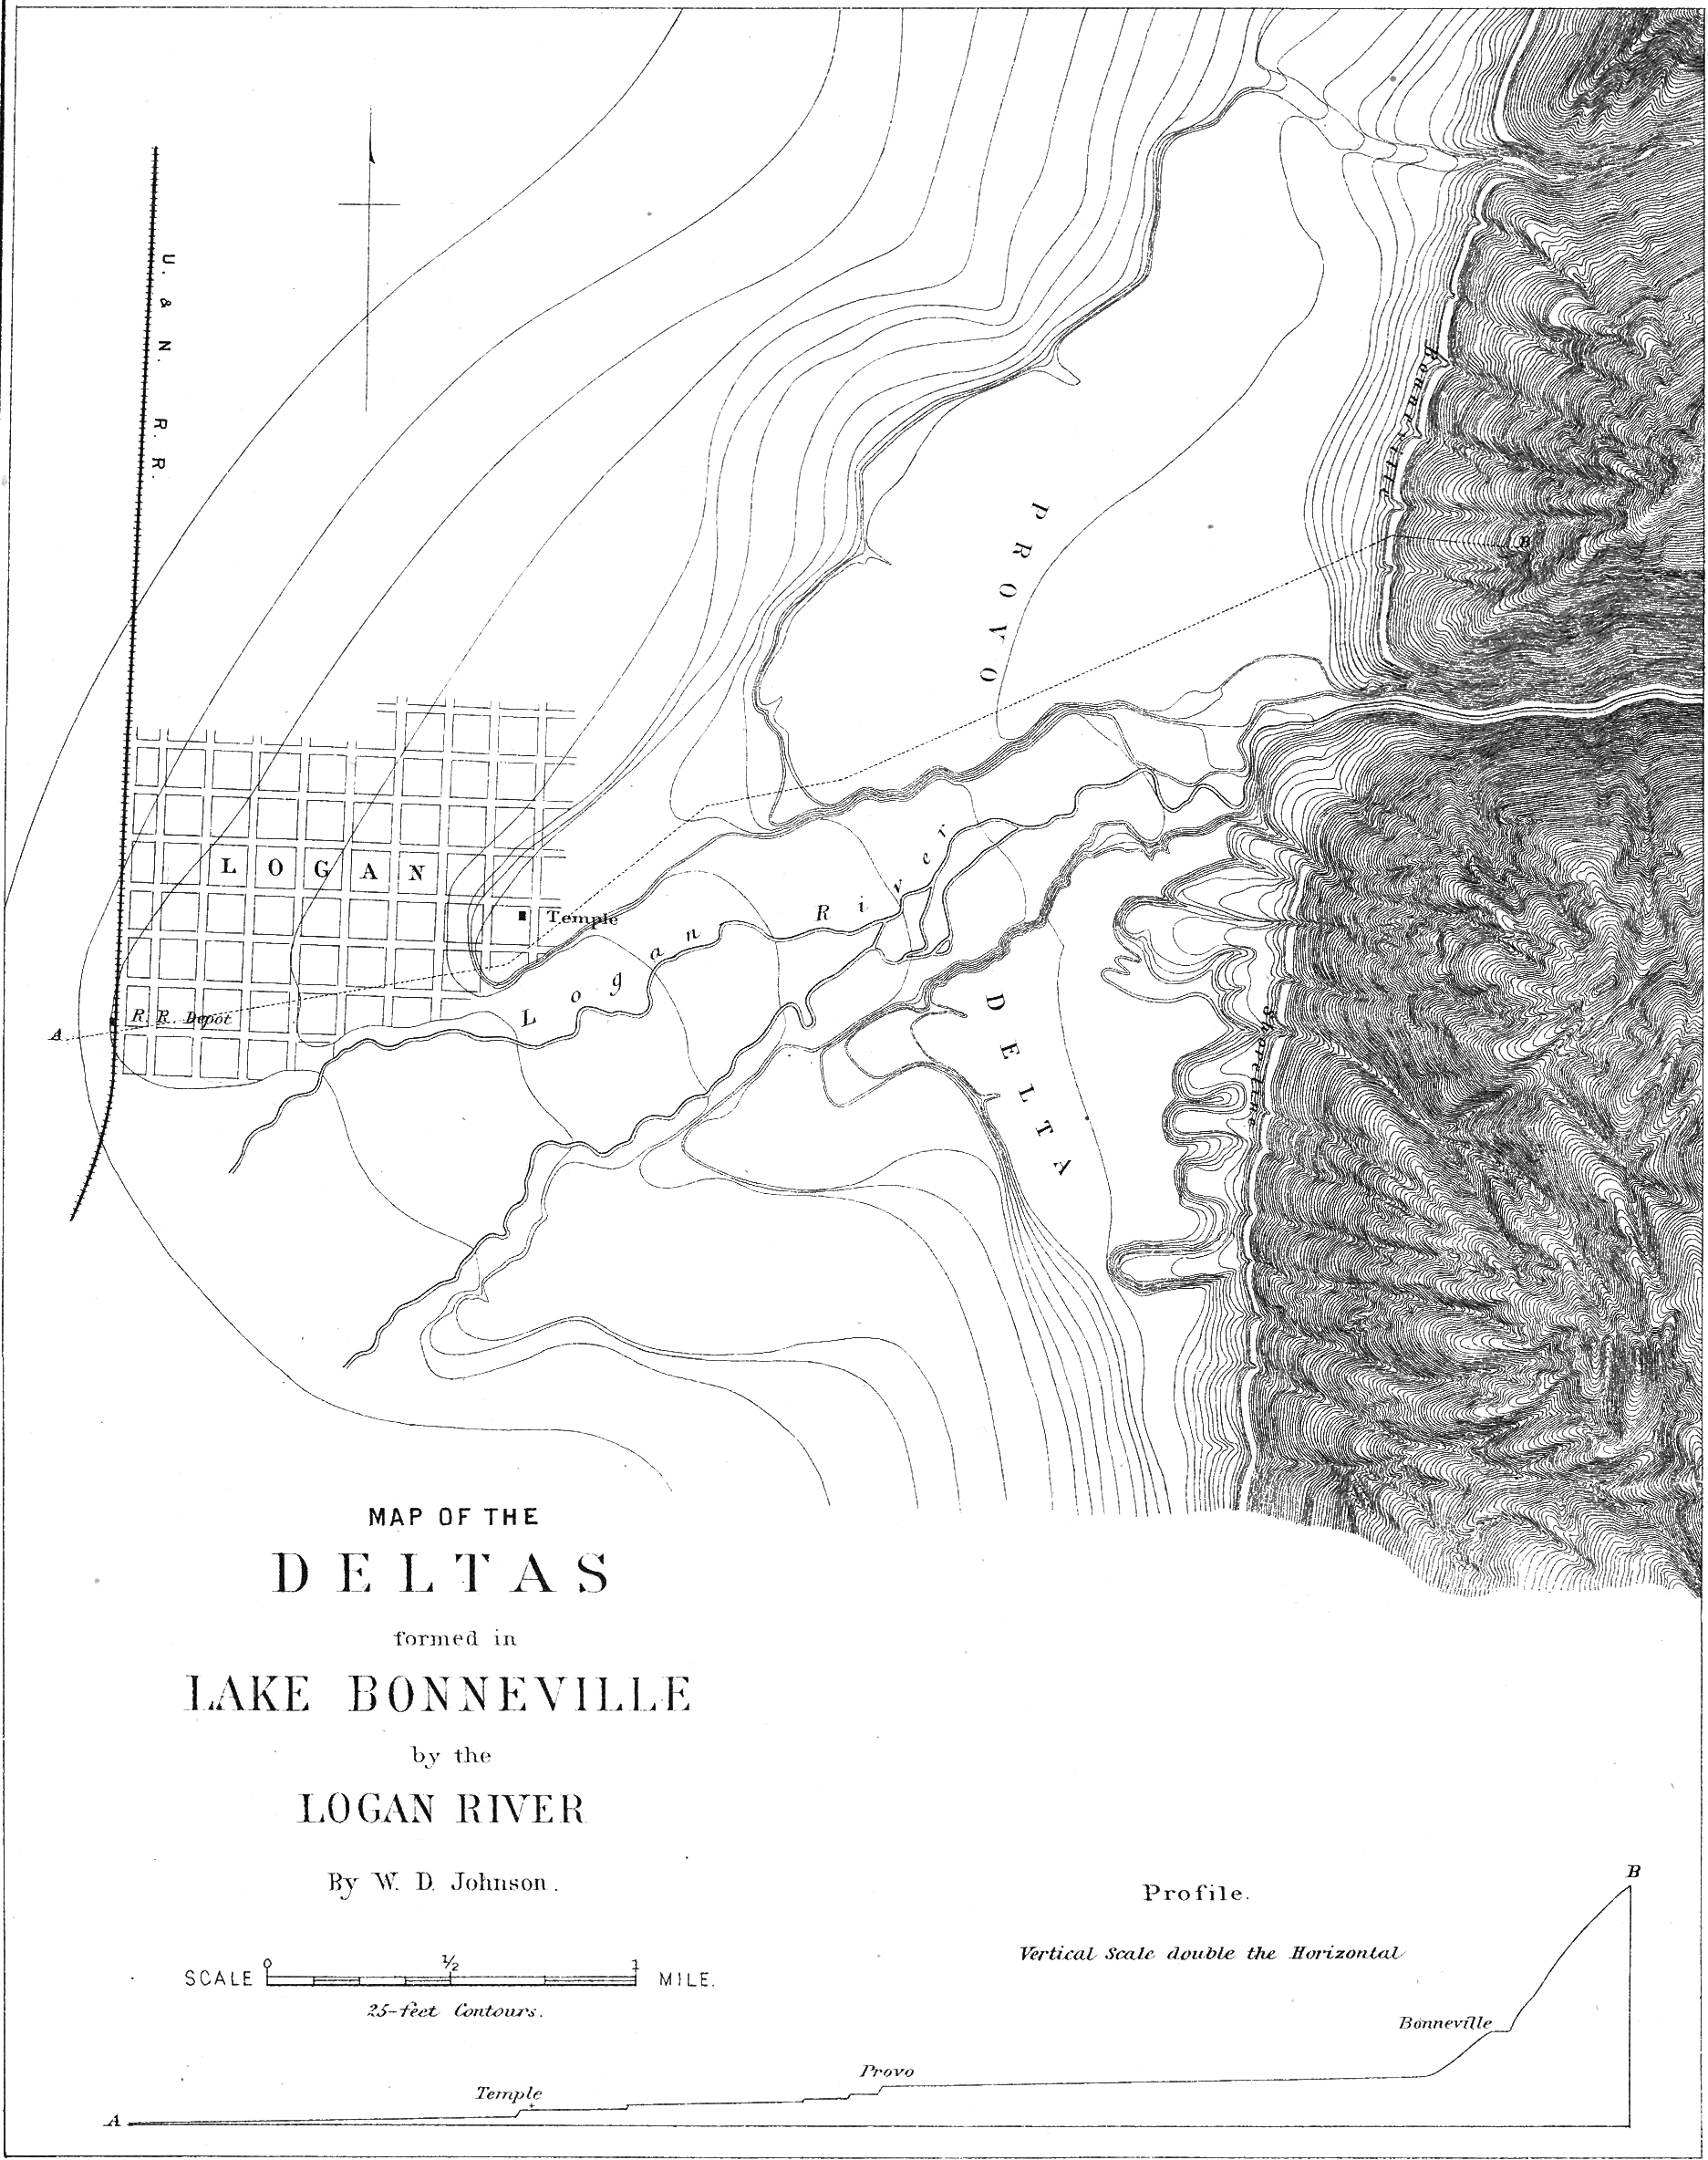 Contours of the Logan Delta, incised by the Logan River.